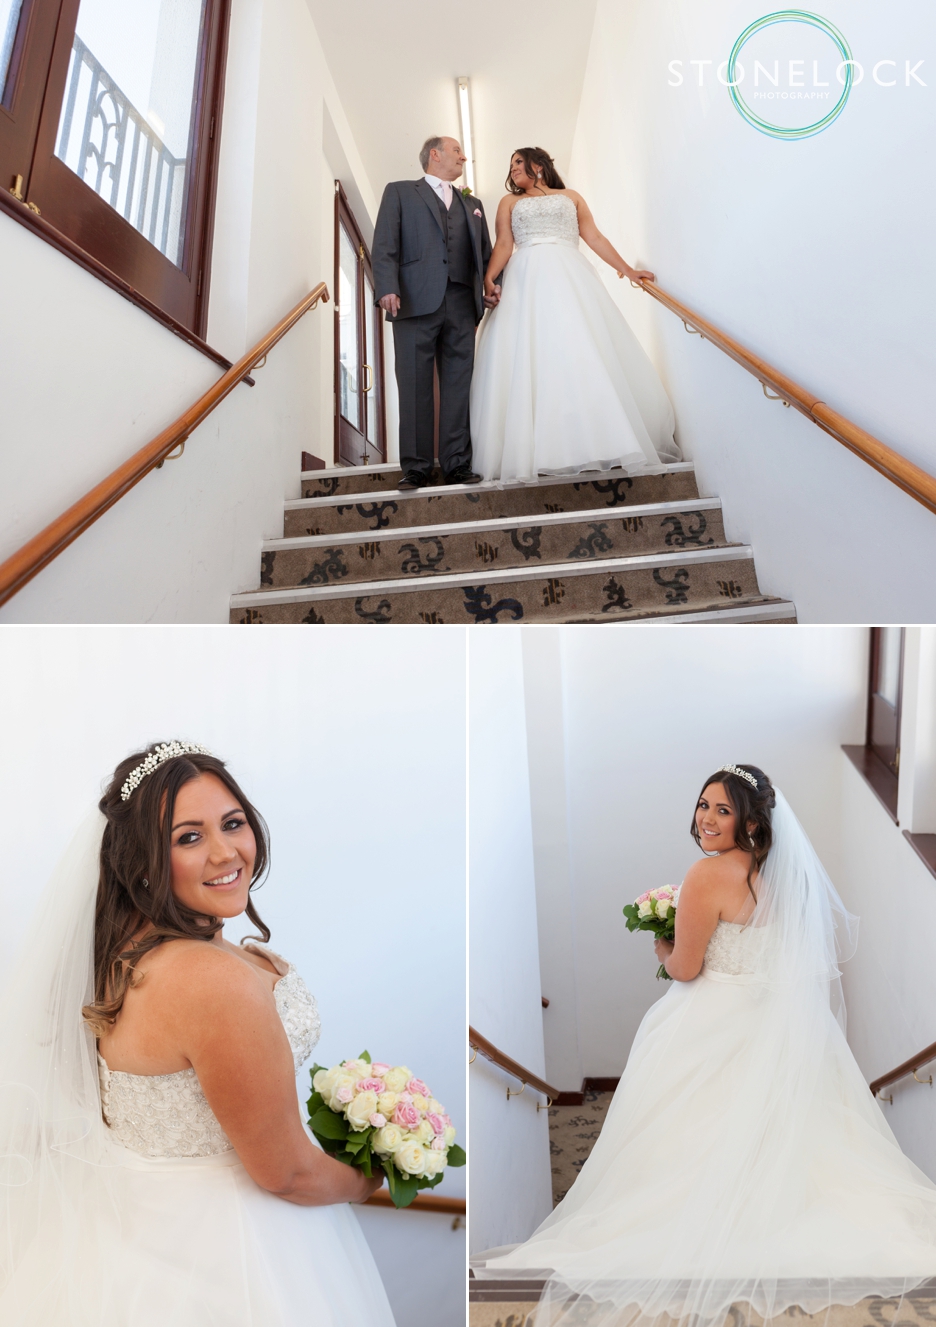 The bride and her father at Copthorne Effingham Park Hotel Surrey